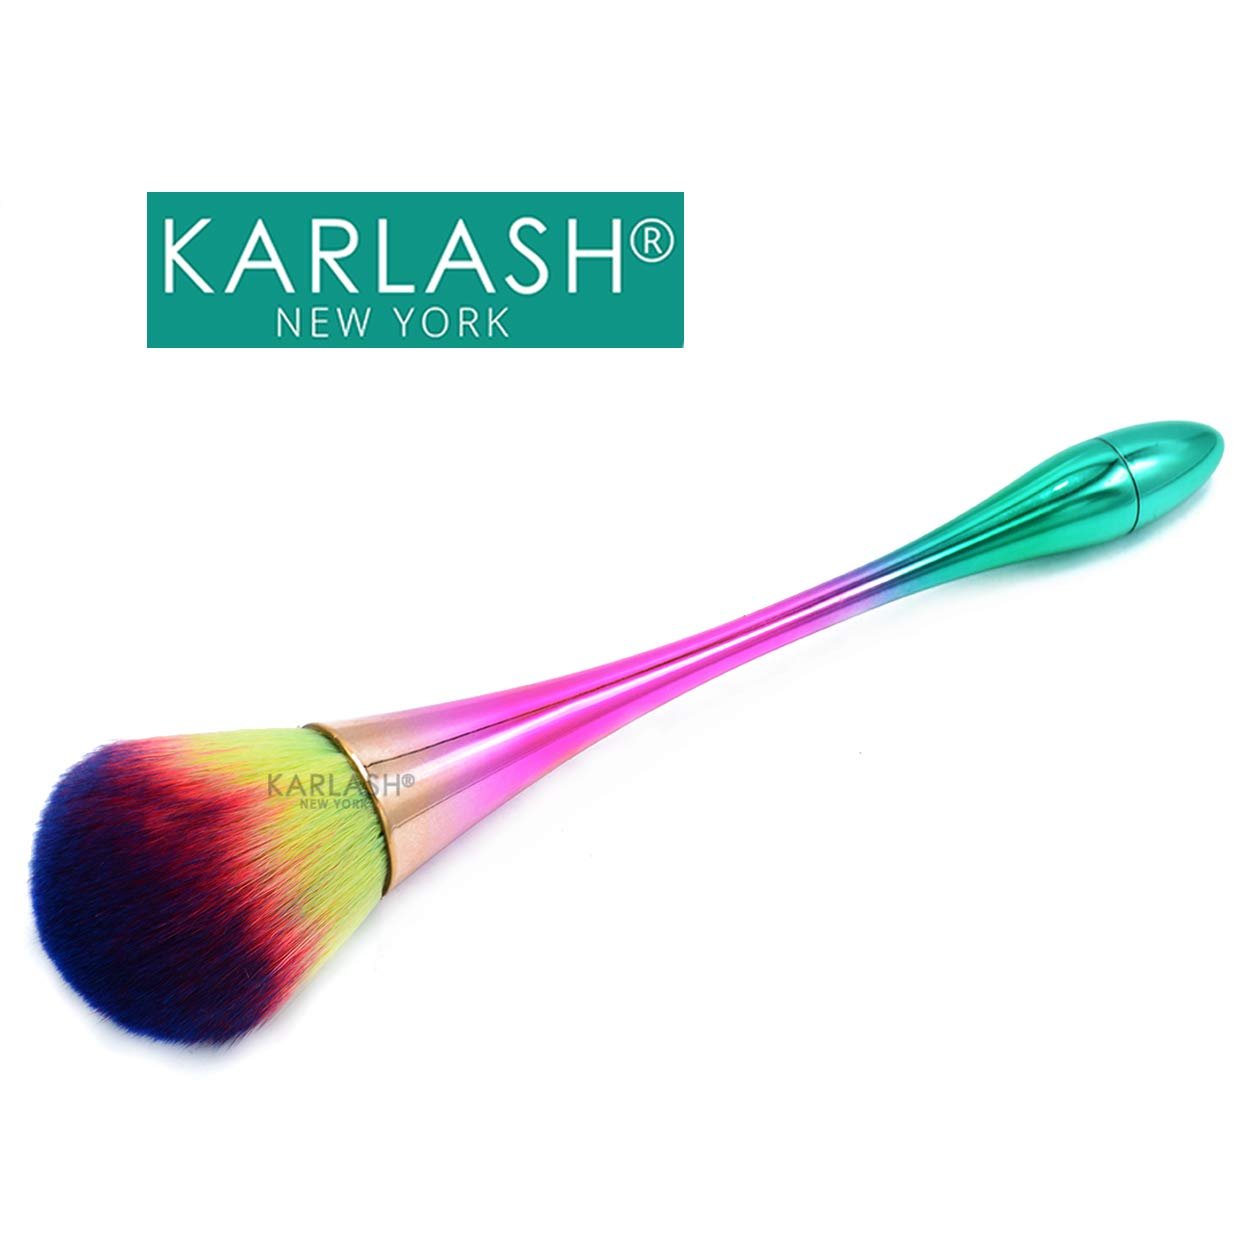 Karlash Nail Art Manicure Dust Remover Brush for Acrylic & UVGel Nails,Makeup Powder Brush #6 (Colorful))